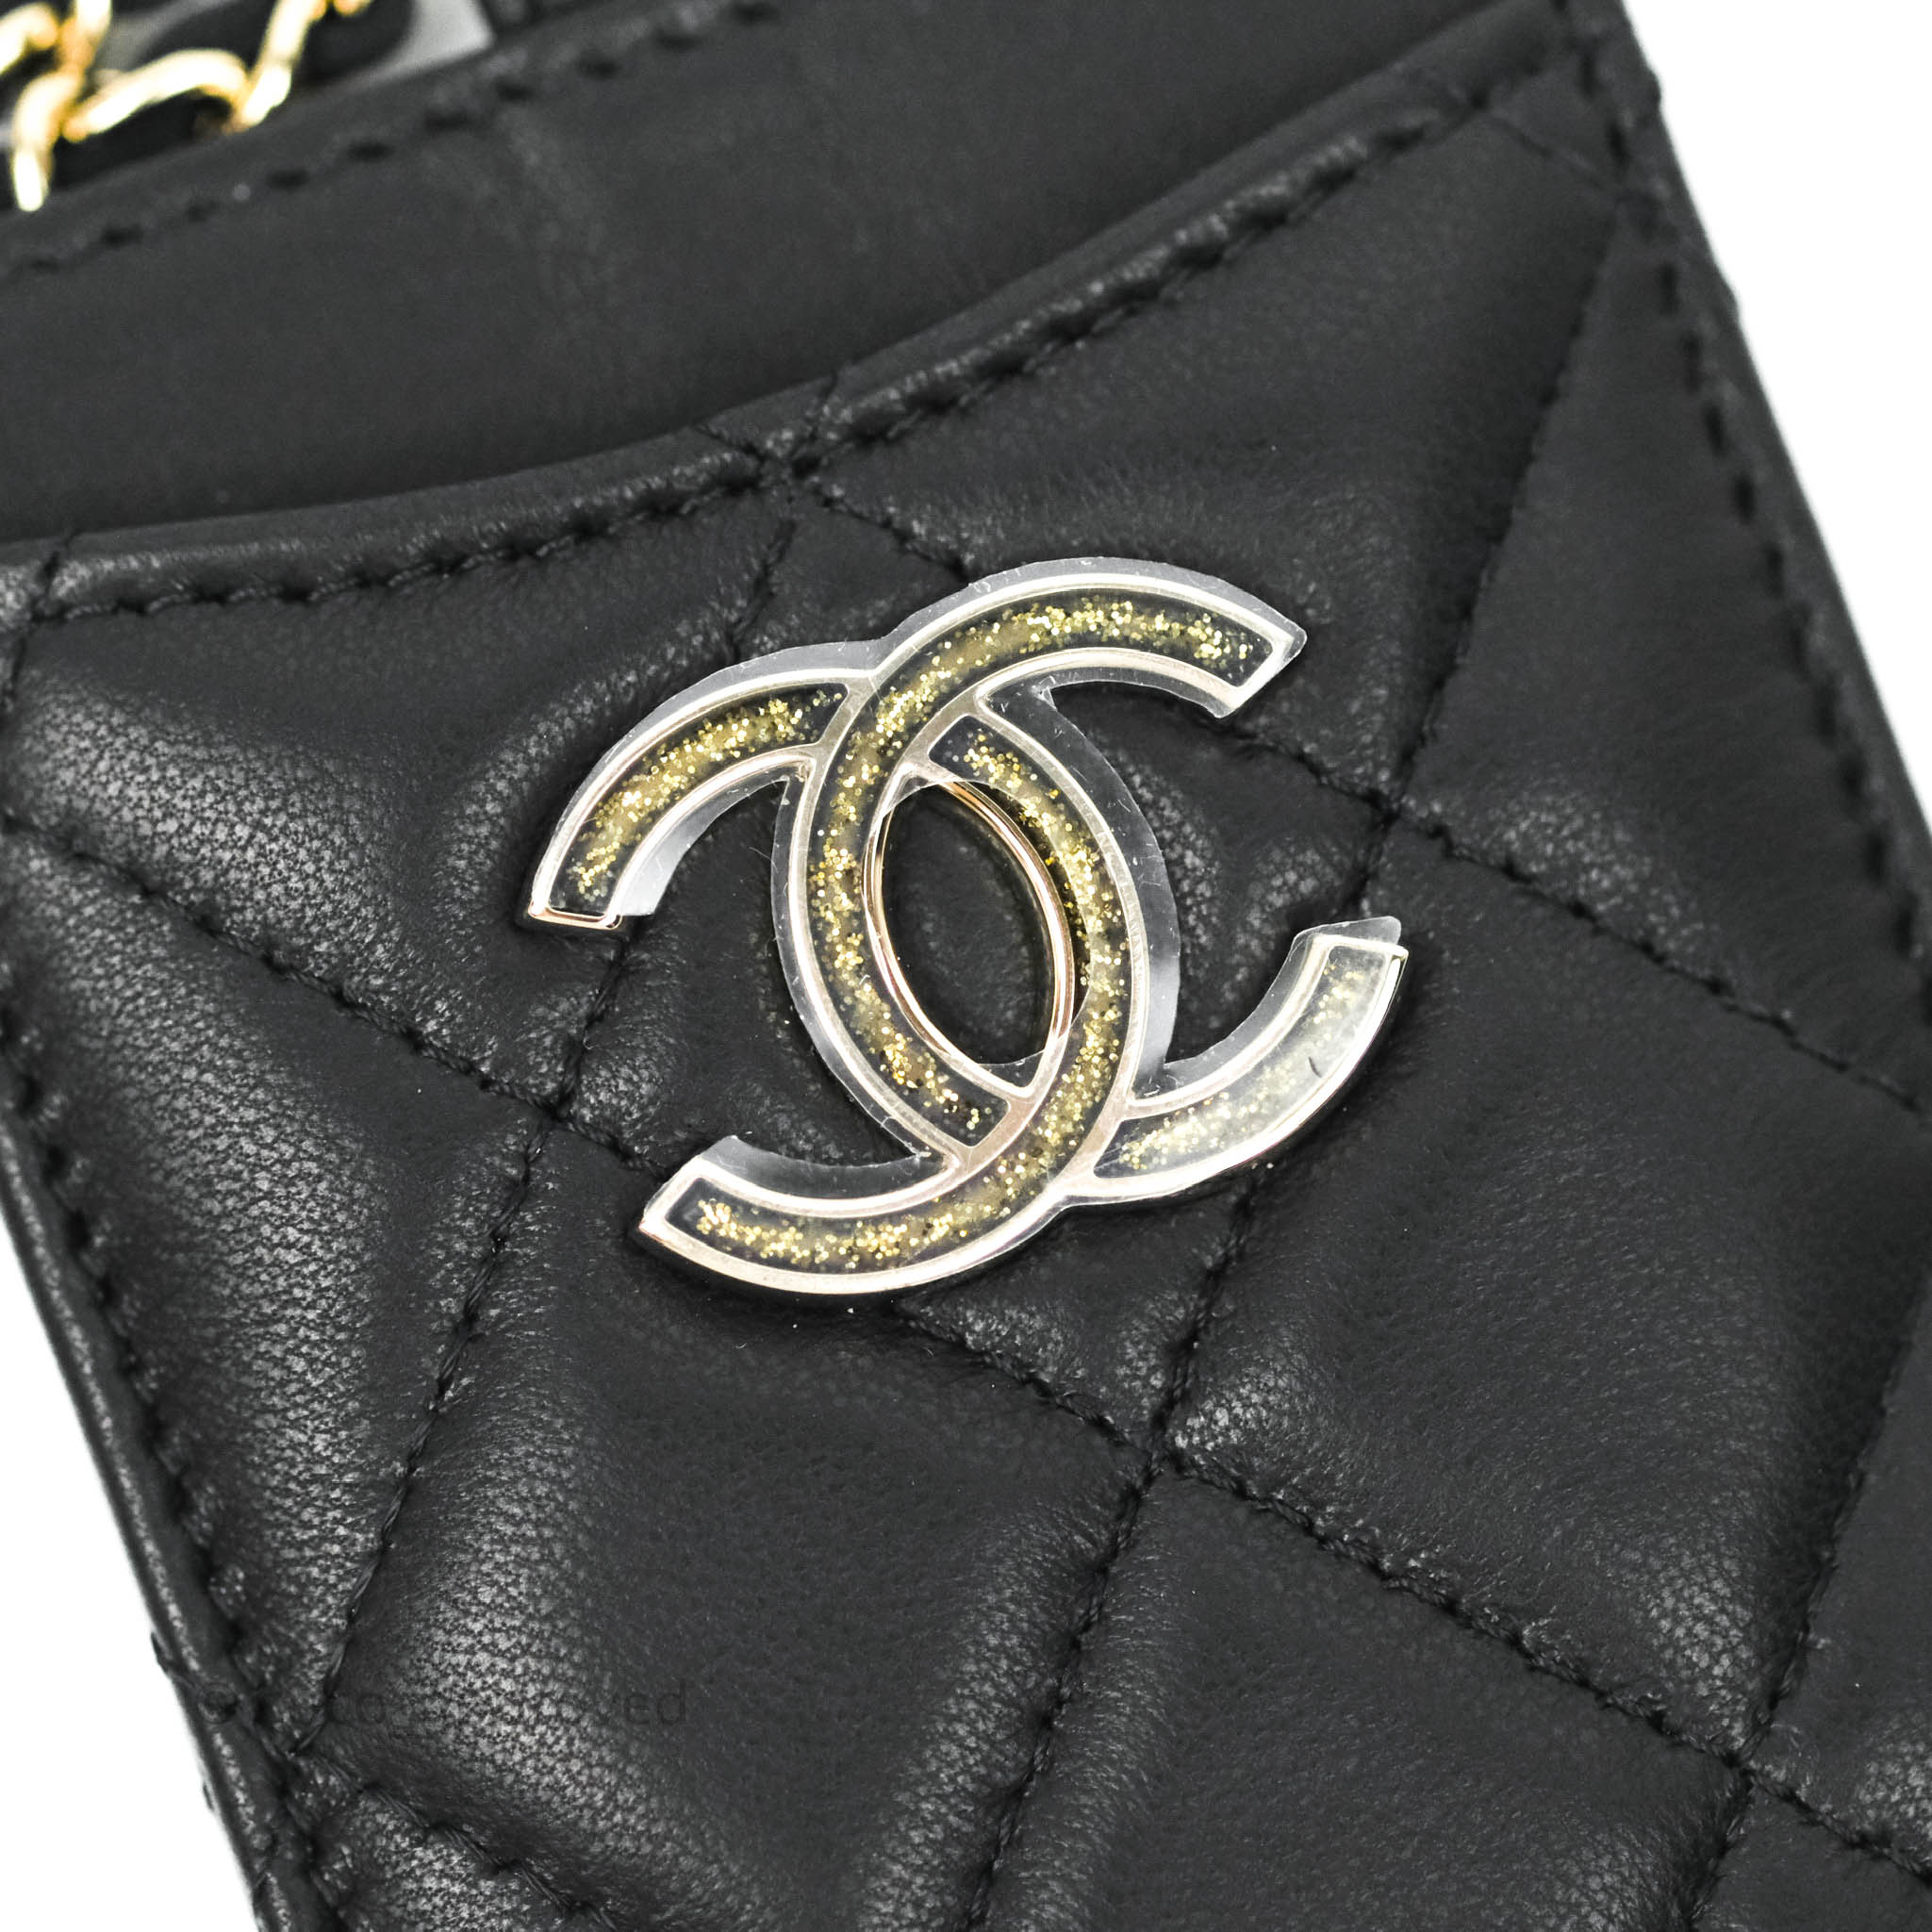 CHANEL Lambskin Quilted Glitter CC Flap Card Holder Wallet Black